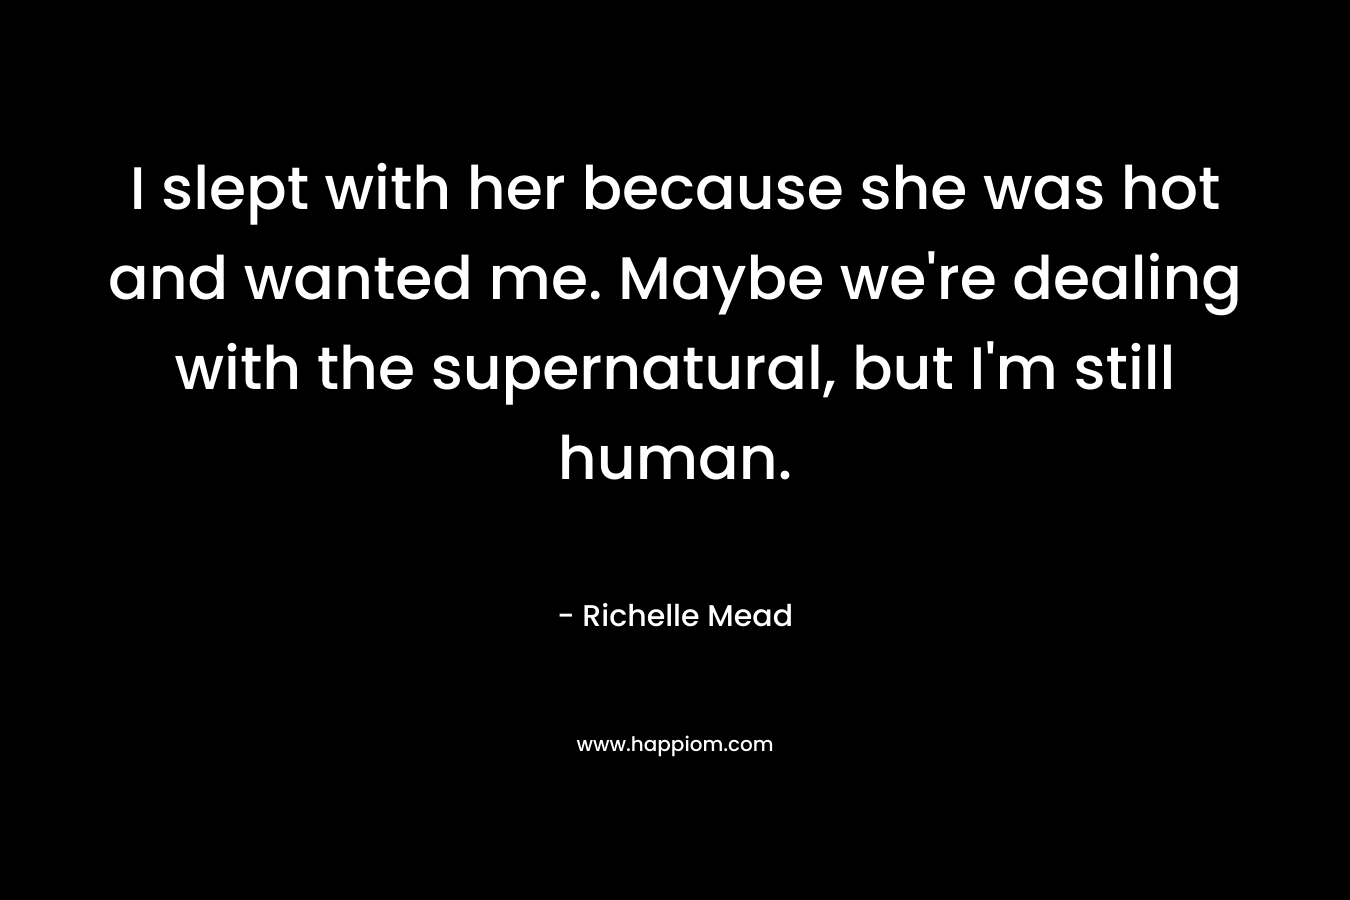 I slept with her because she was hot and wanted me. Maybe we’re dealing with the supernatural, but I’m still human. – Richelle Mead